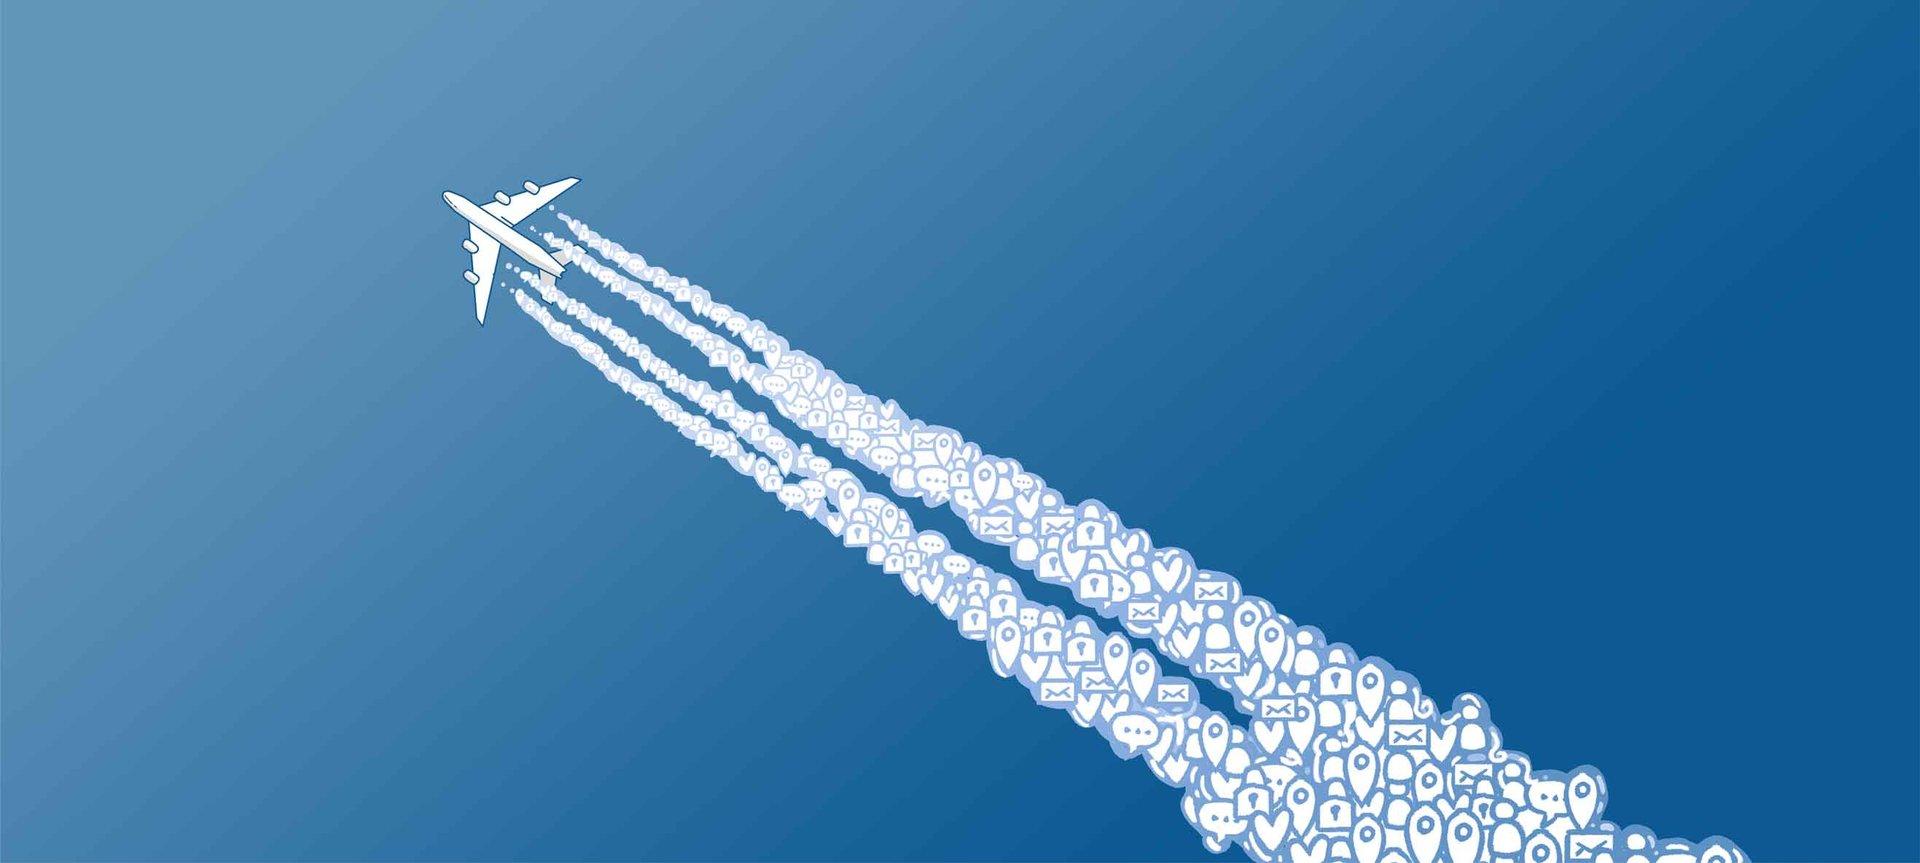 Airplane in blue sky with condensation trail as private online information and social media data